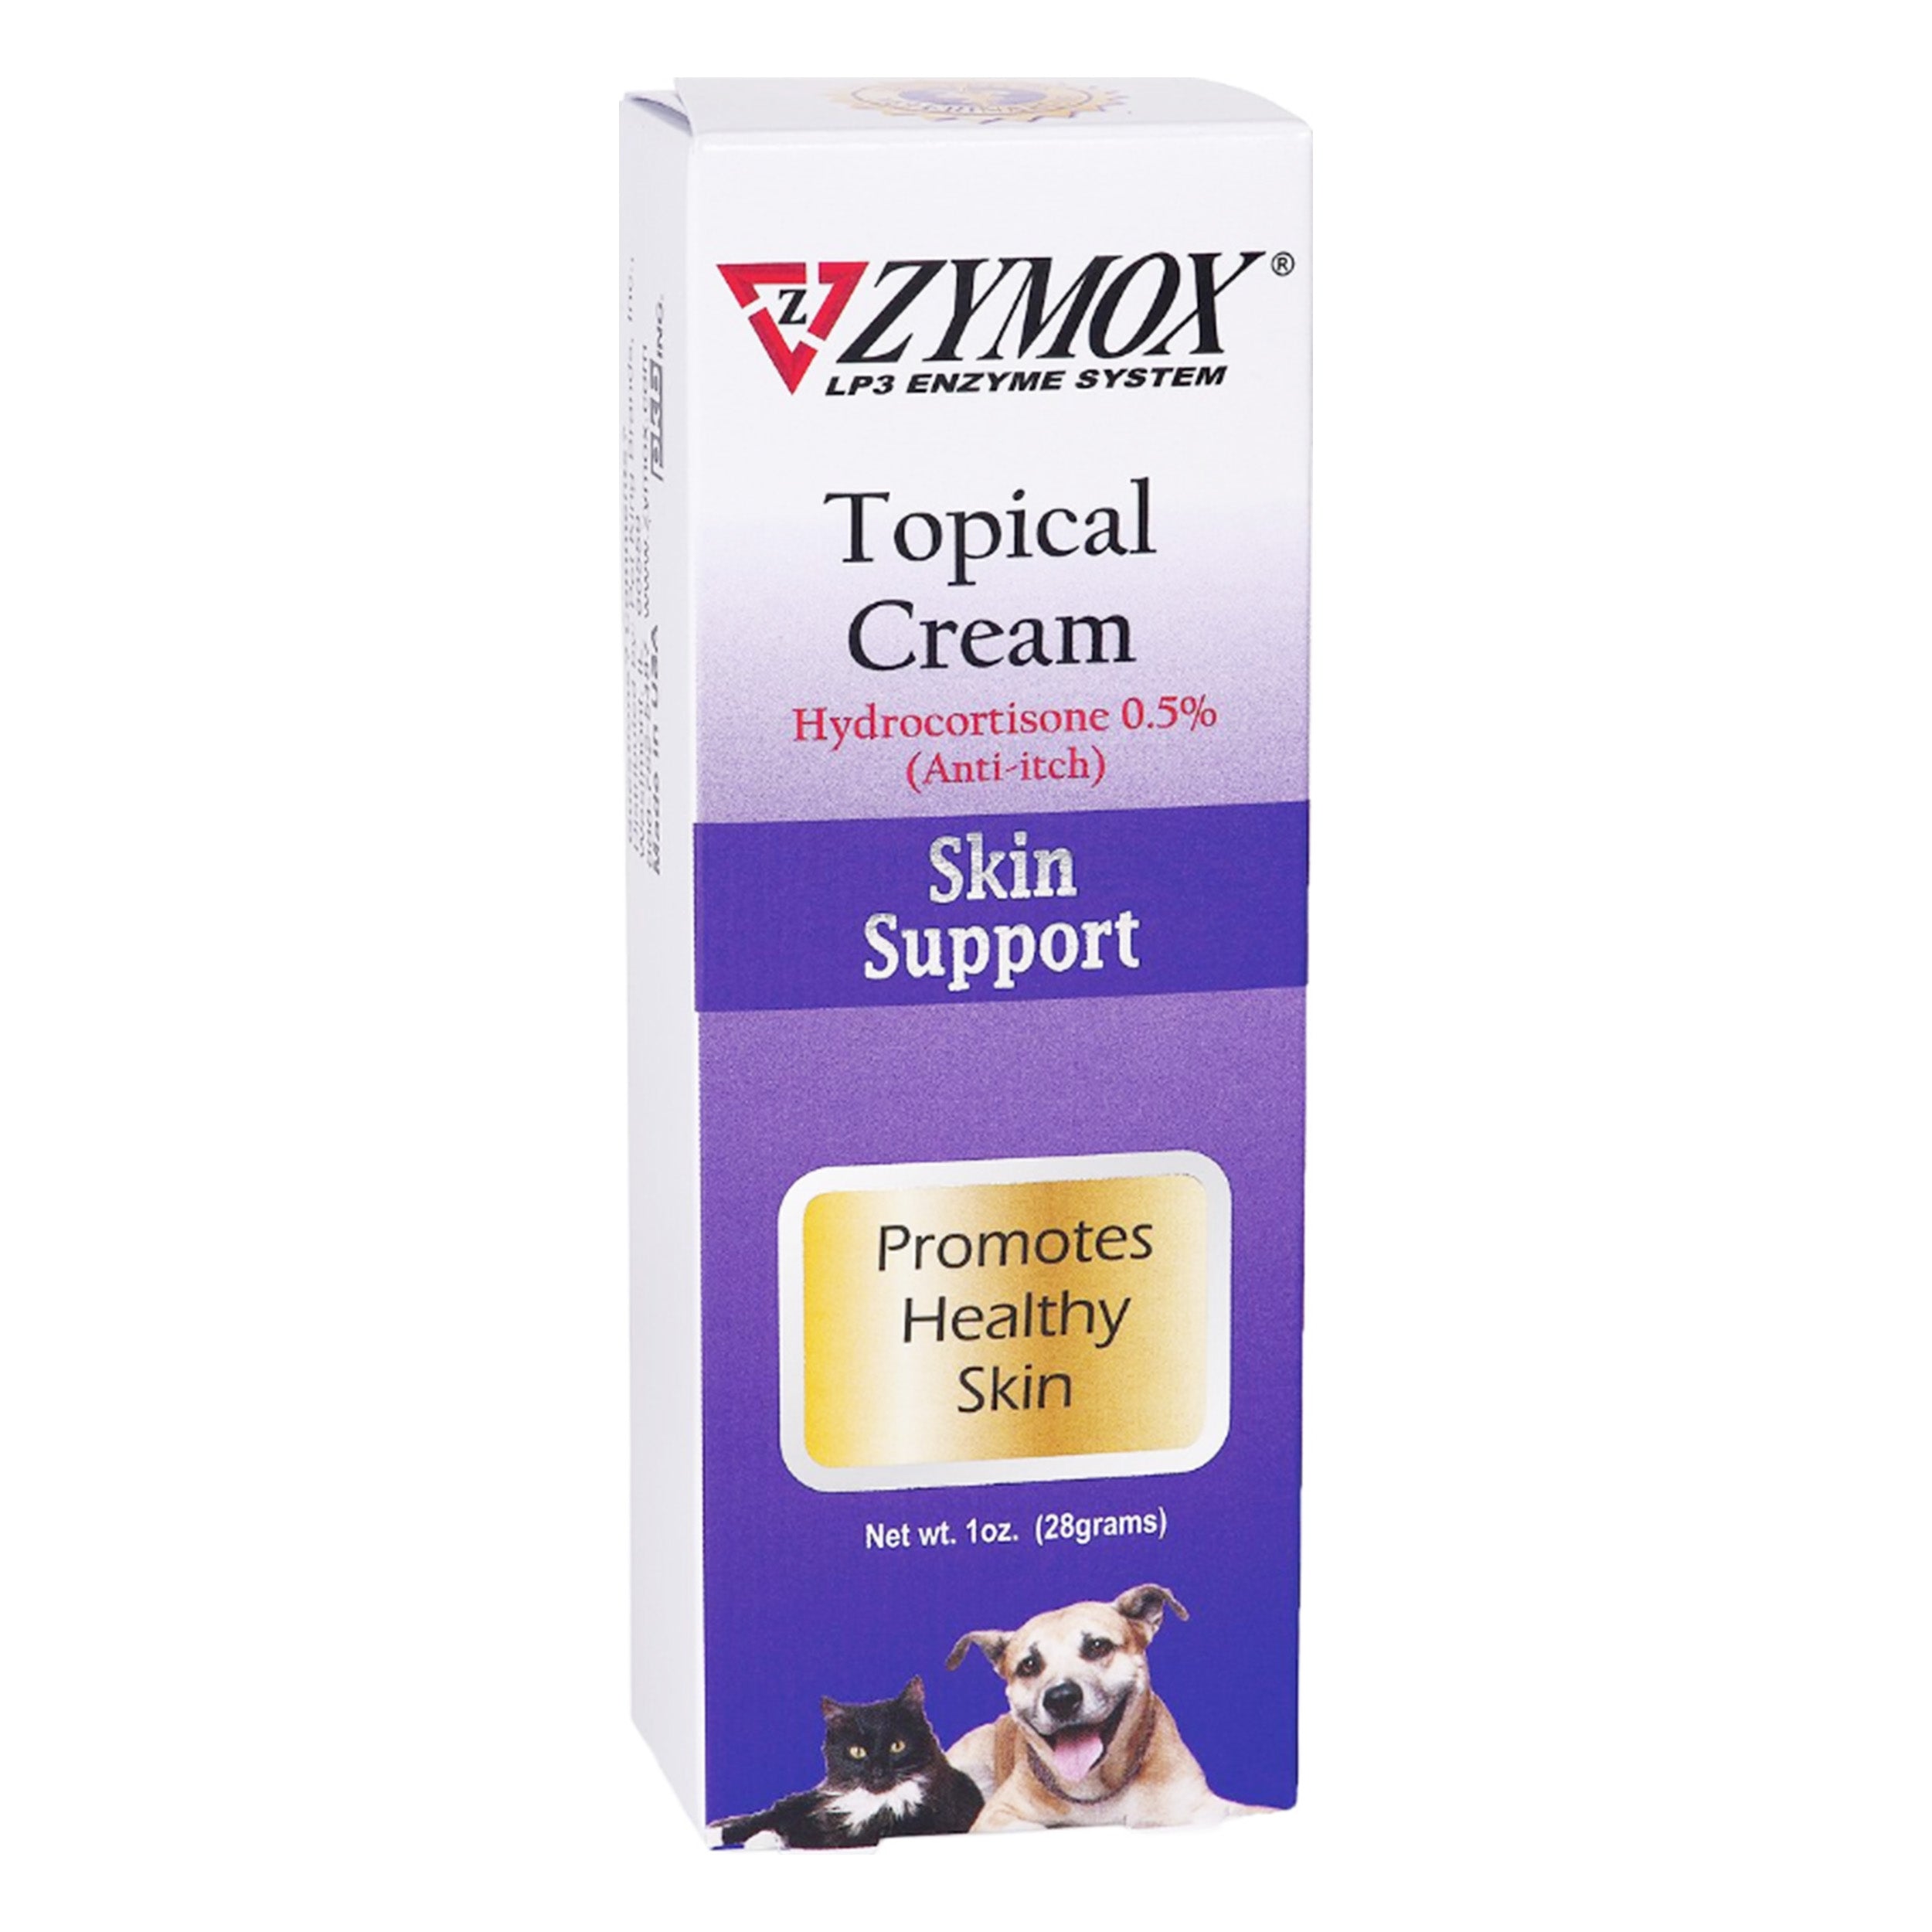 Zymox Topical Cream with Hydrocortisone 0.5% for Dogs & Cats, 1-oz bottle